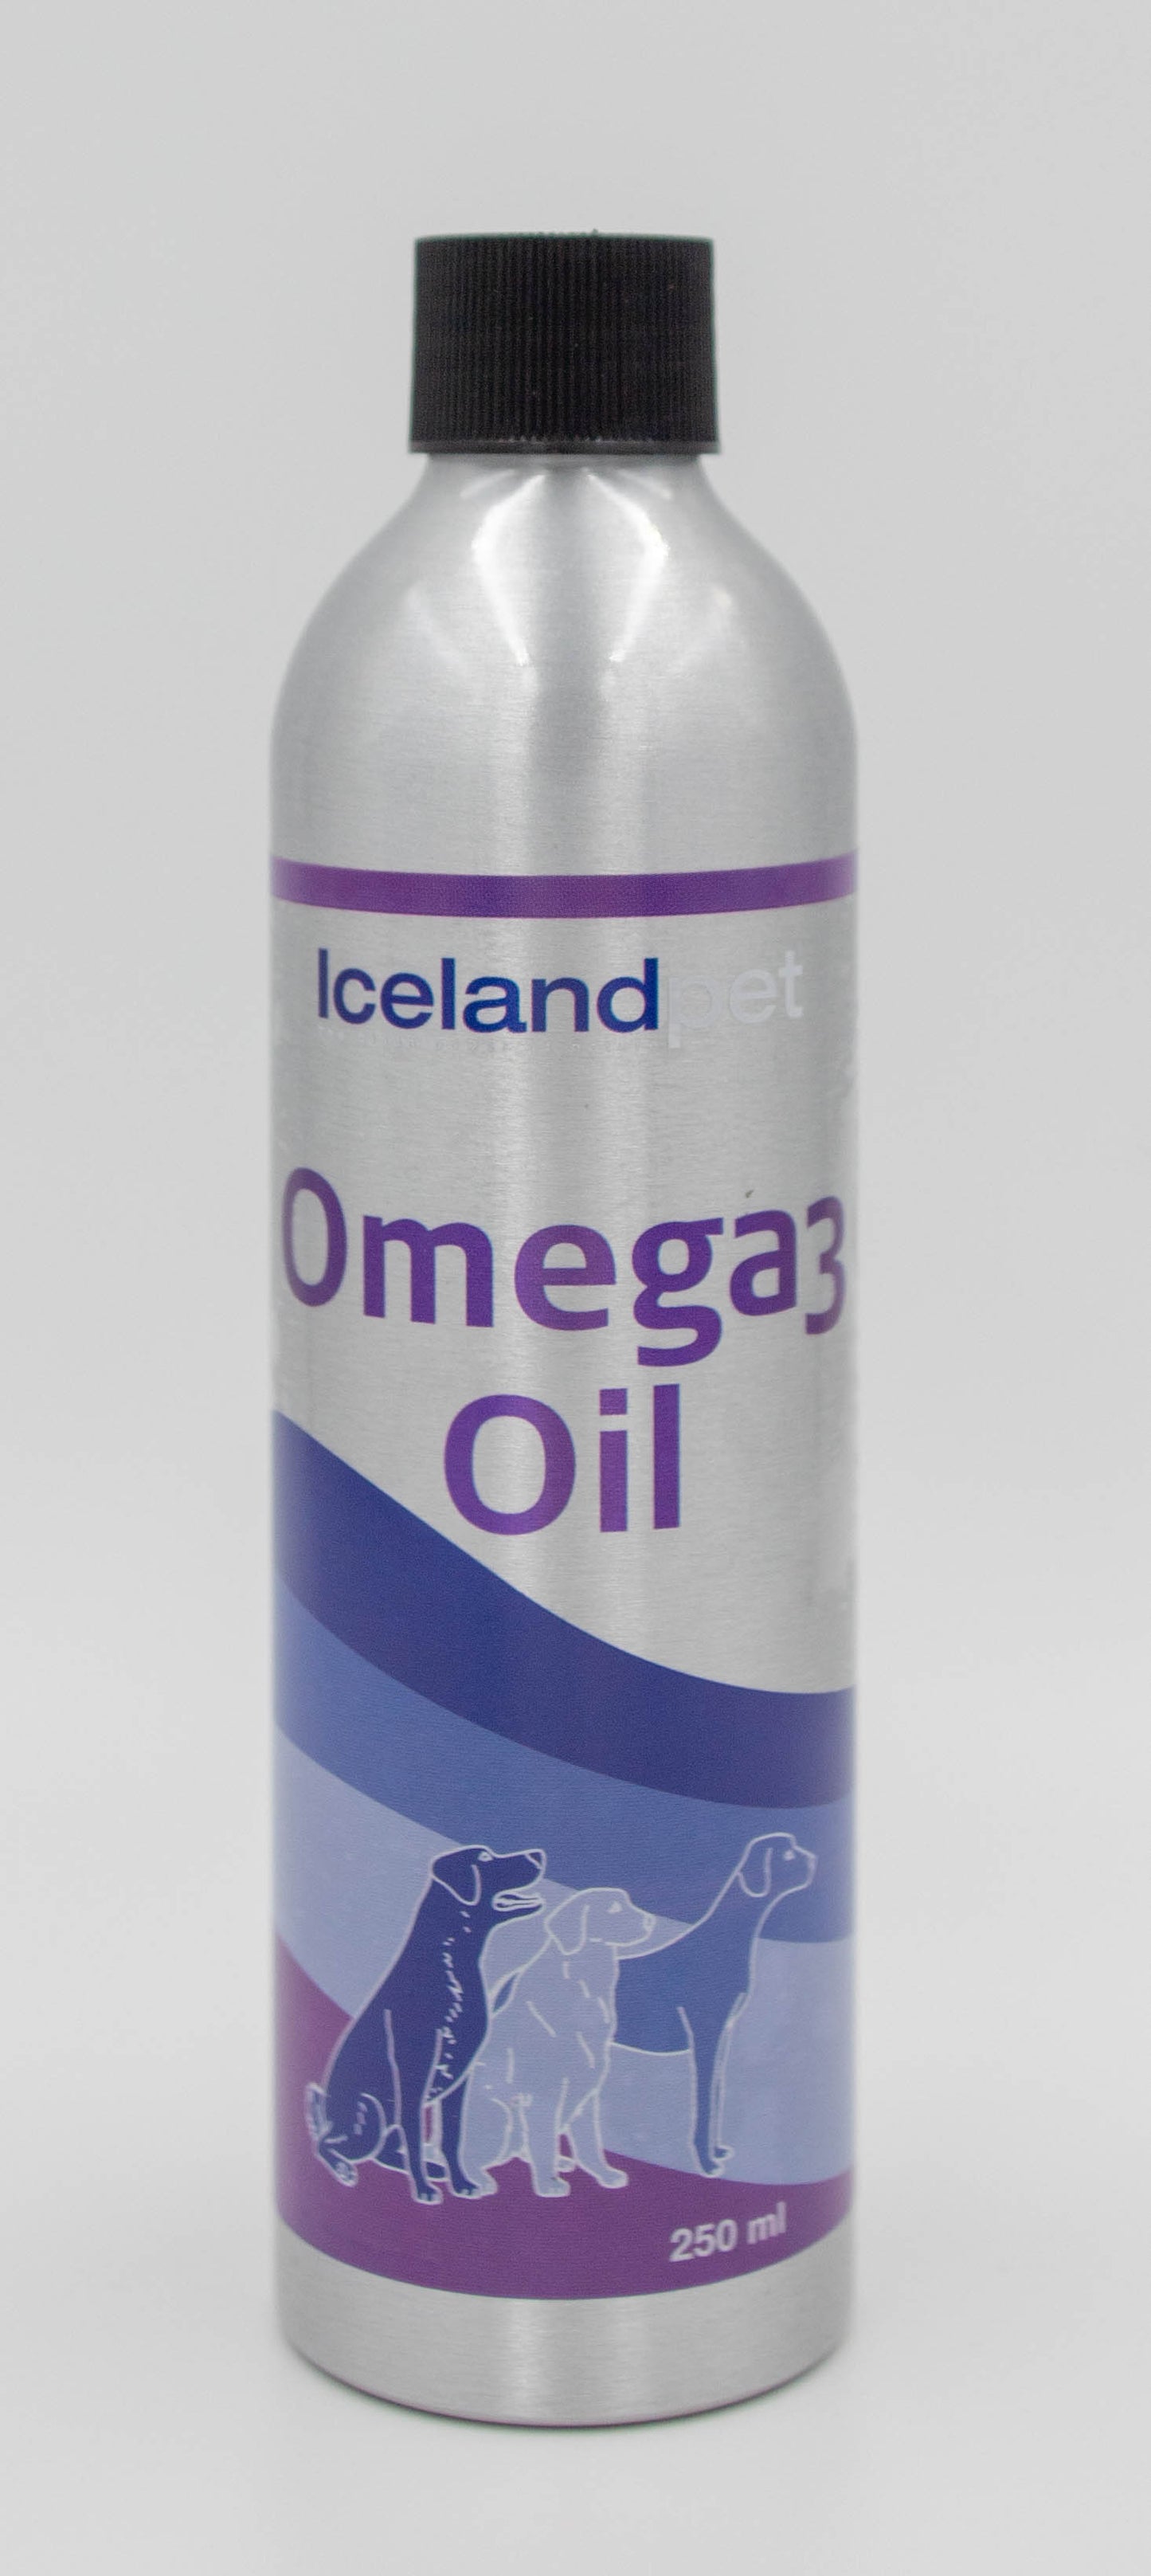 Omega 3 Oil for Cats & Dogs (250ml) -Topiceland